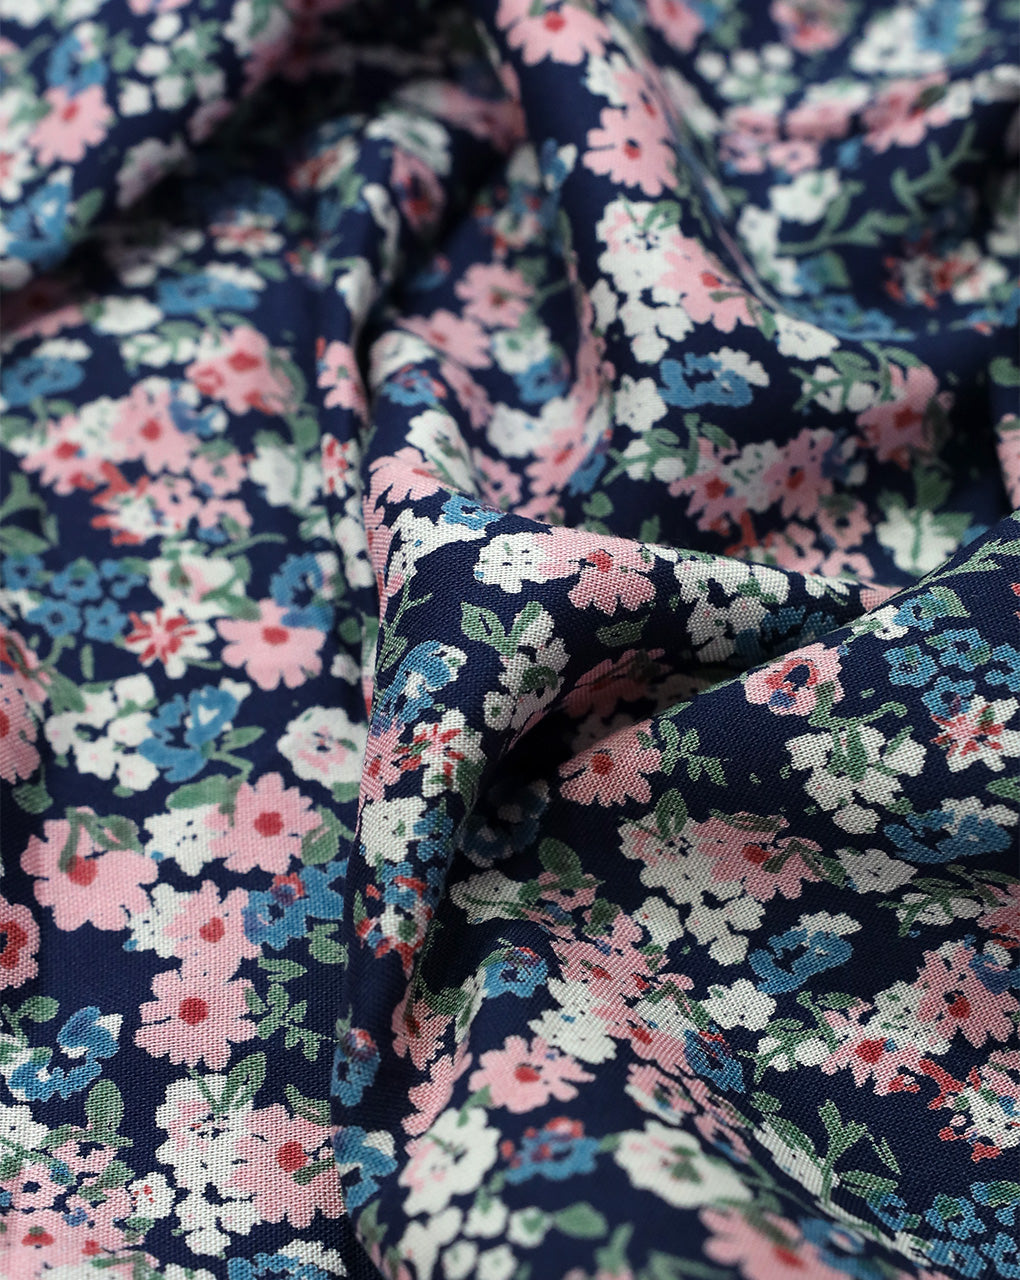 MULTICOLOR SMALL FLORAL DESIGN PRINTED RAYON FABRIC